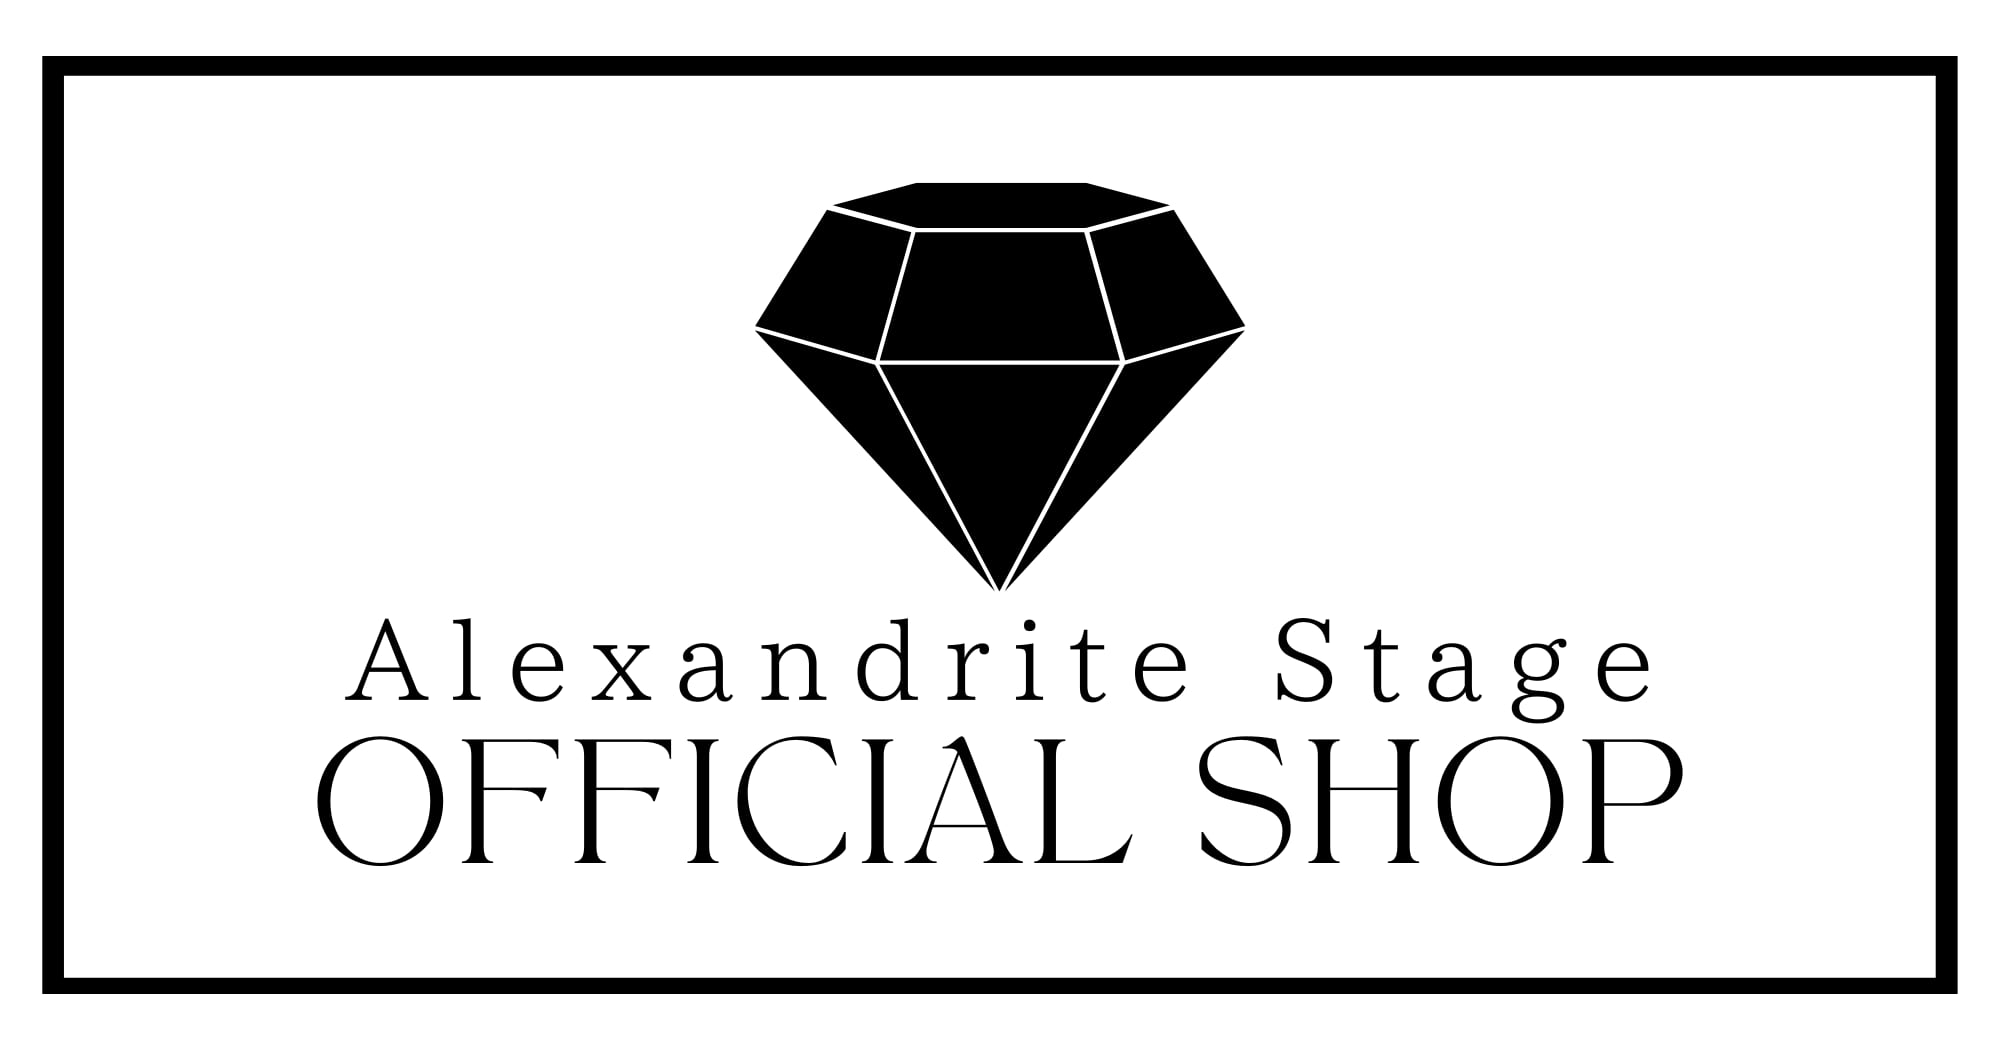 Alexandrite Stage Official Shop